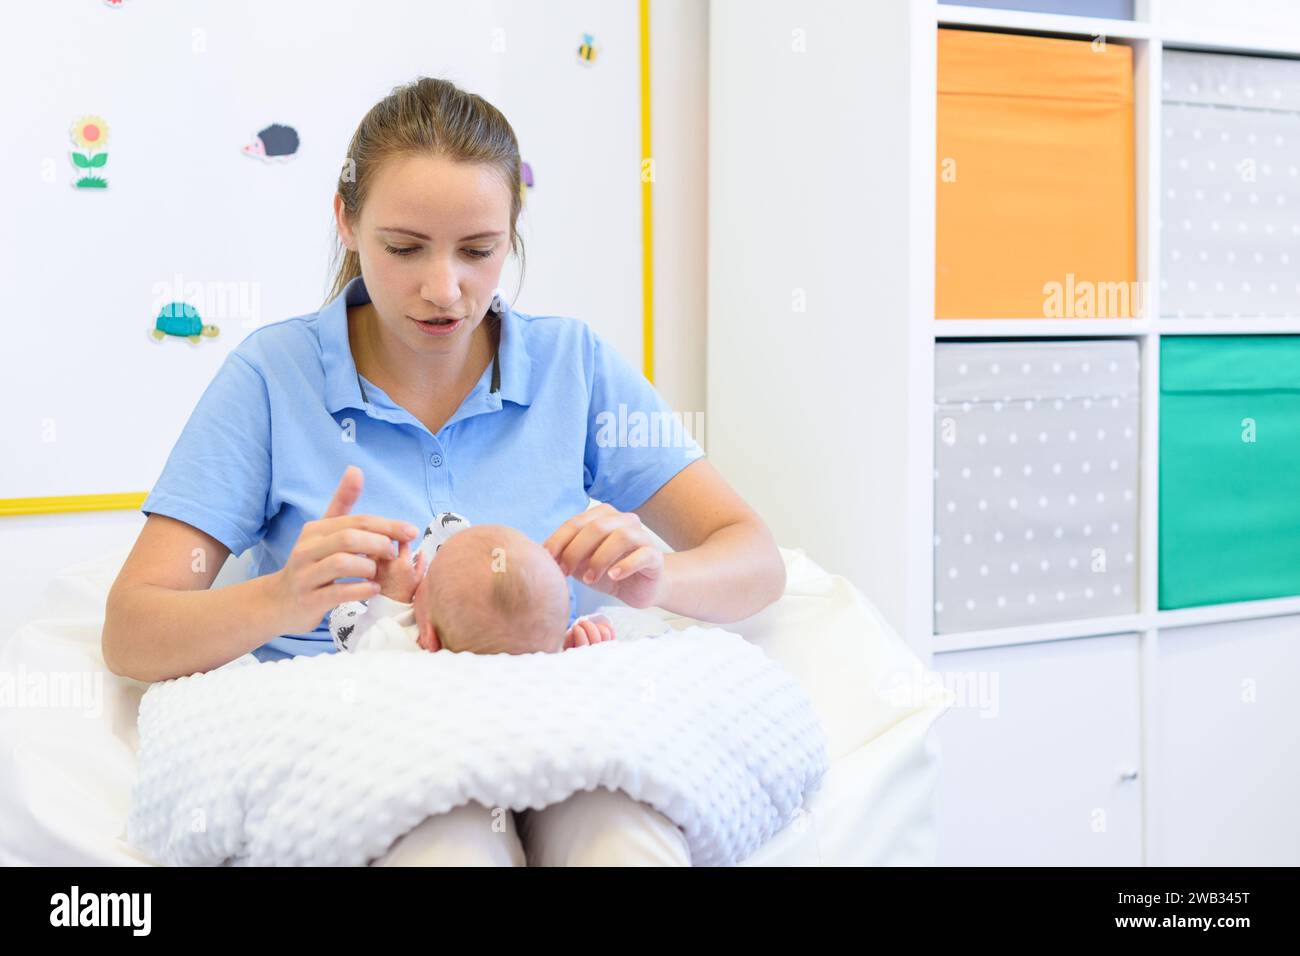 Mother comforting newborn. Midwife doing medical check on a newborn baby boy. Stock Photo